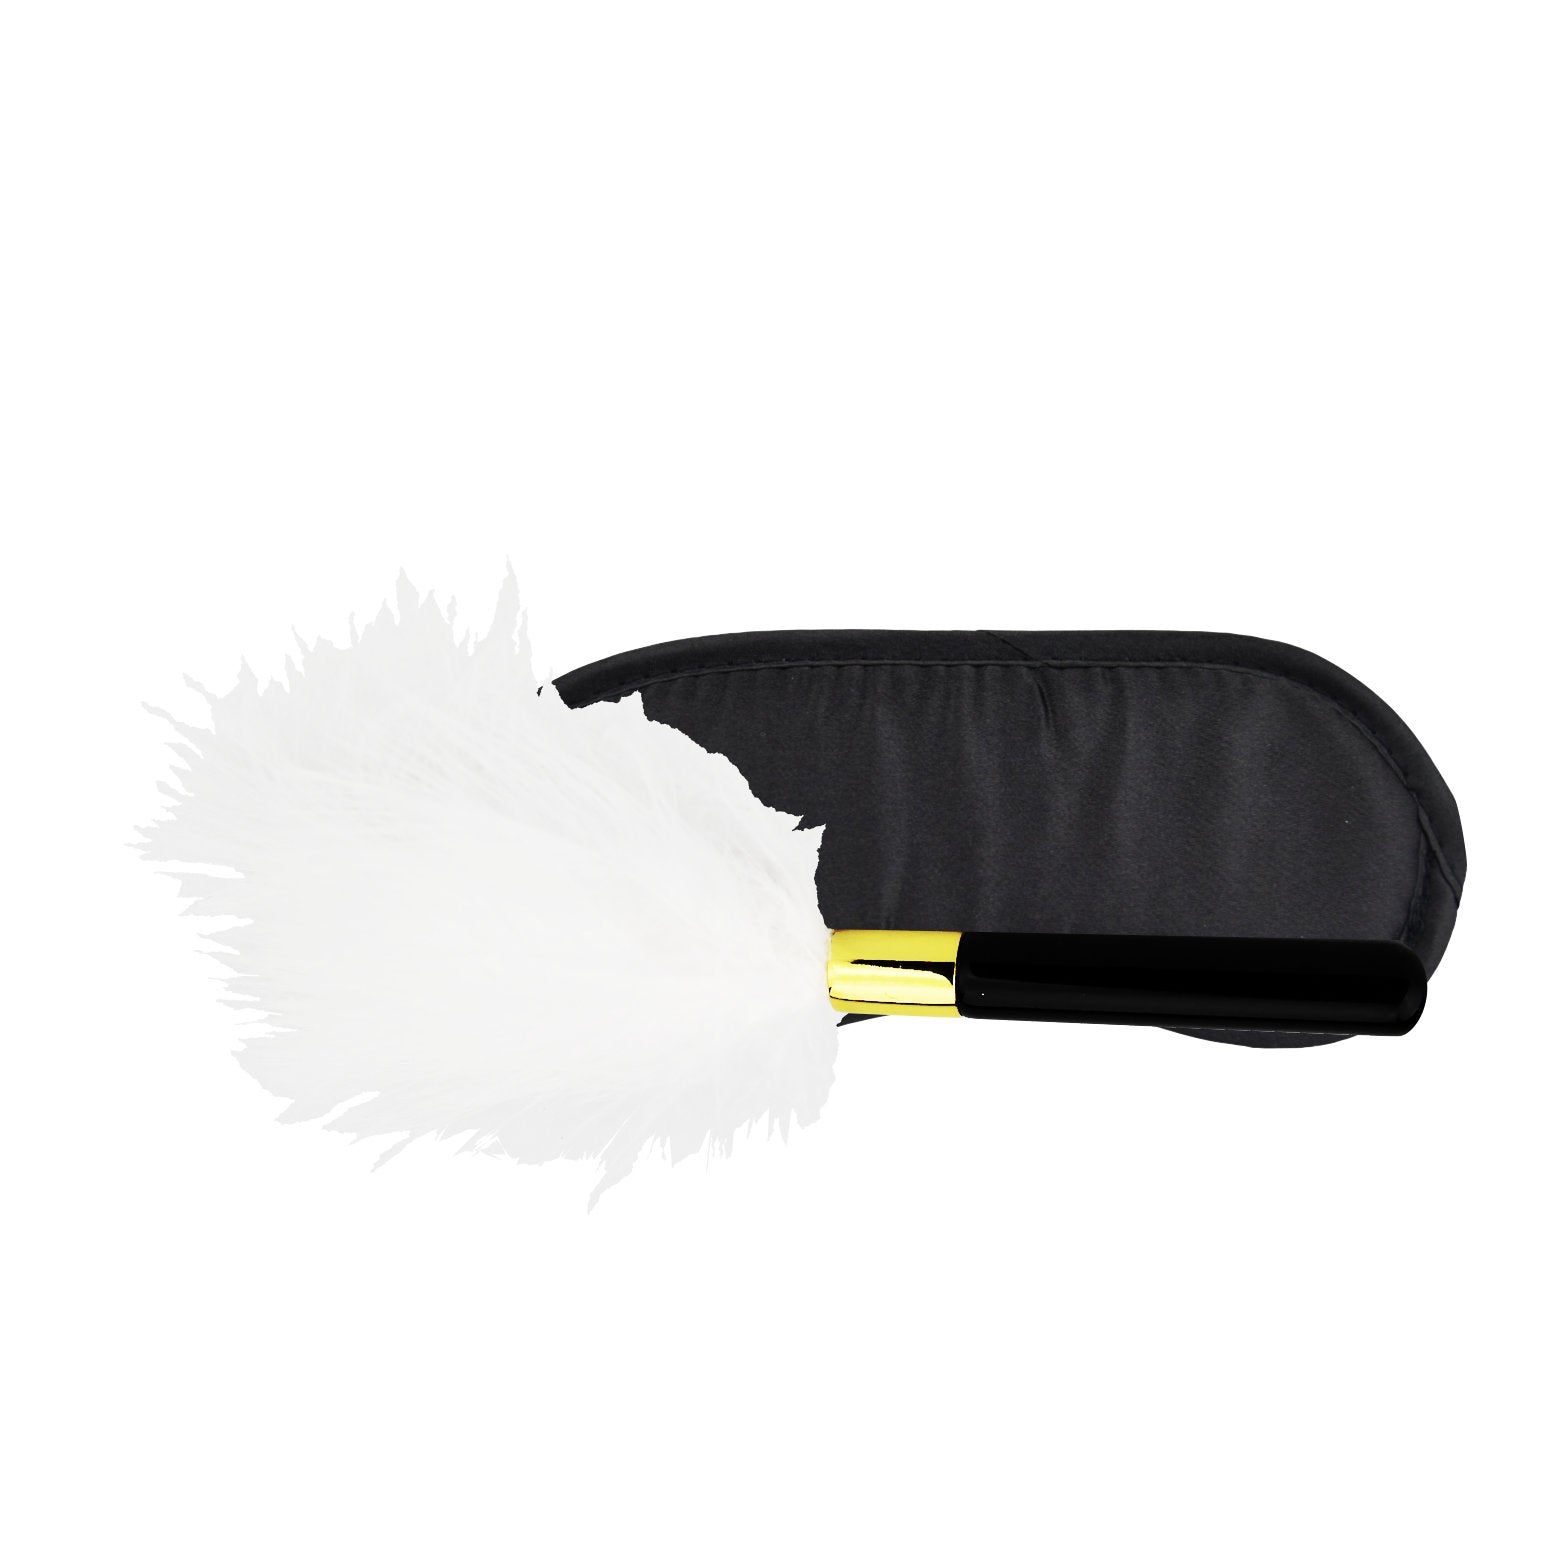 Bound to Play. Eye Mask and Feather Tickler Play Kit - PL4YHOUSE - PL4YHOUSE - Bound to Play - Blindfolds - Bound to Play. Eye Mask and Feather Tickler Play Kit - {{ sex }} - {{ adult_toys }} - {{ UK }} - {{ christmas }} - {{ anal sex toys }} - {{ bondage }} - {{ dildos }} - {{ essentials }} - {{ male sex toys }} - {{ lingerie }} - {{ vibrators }}